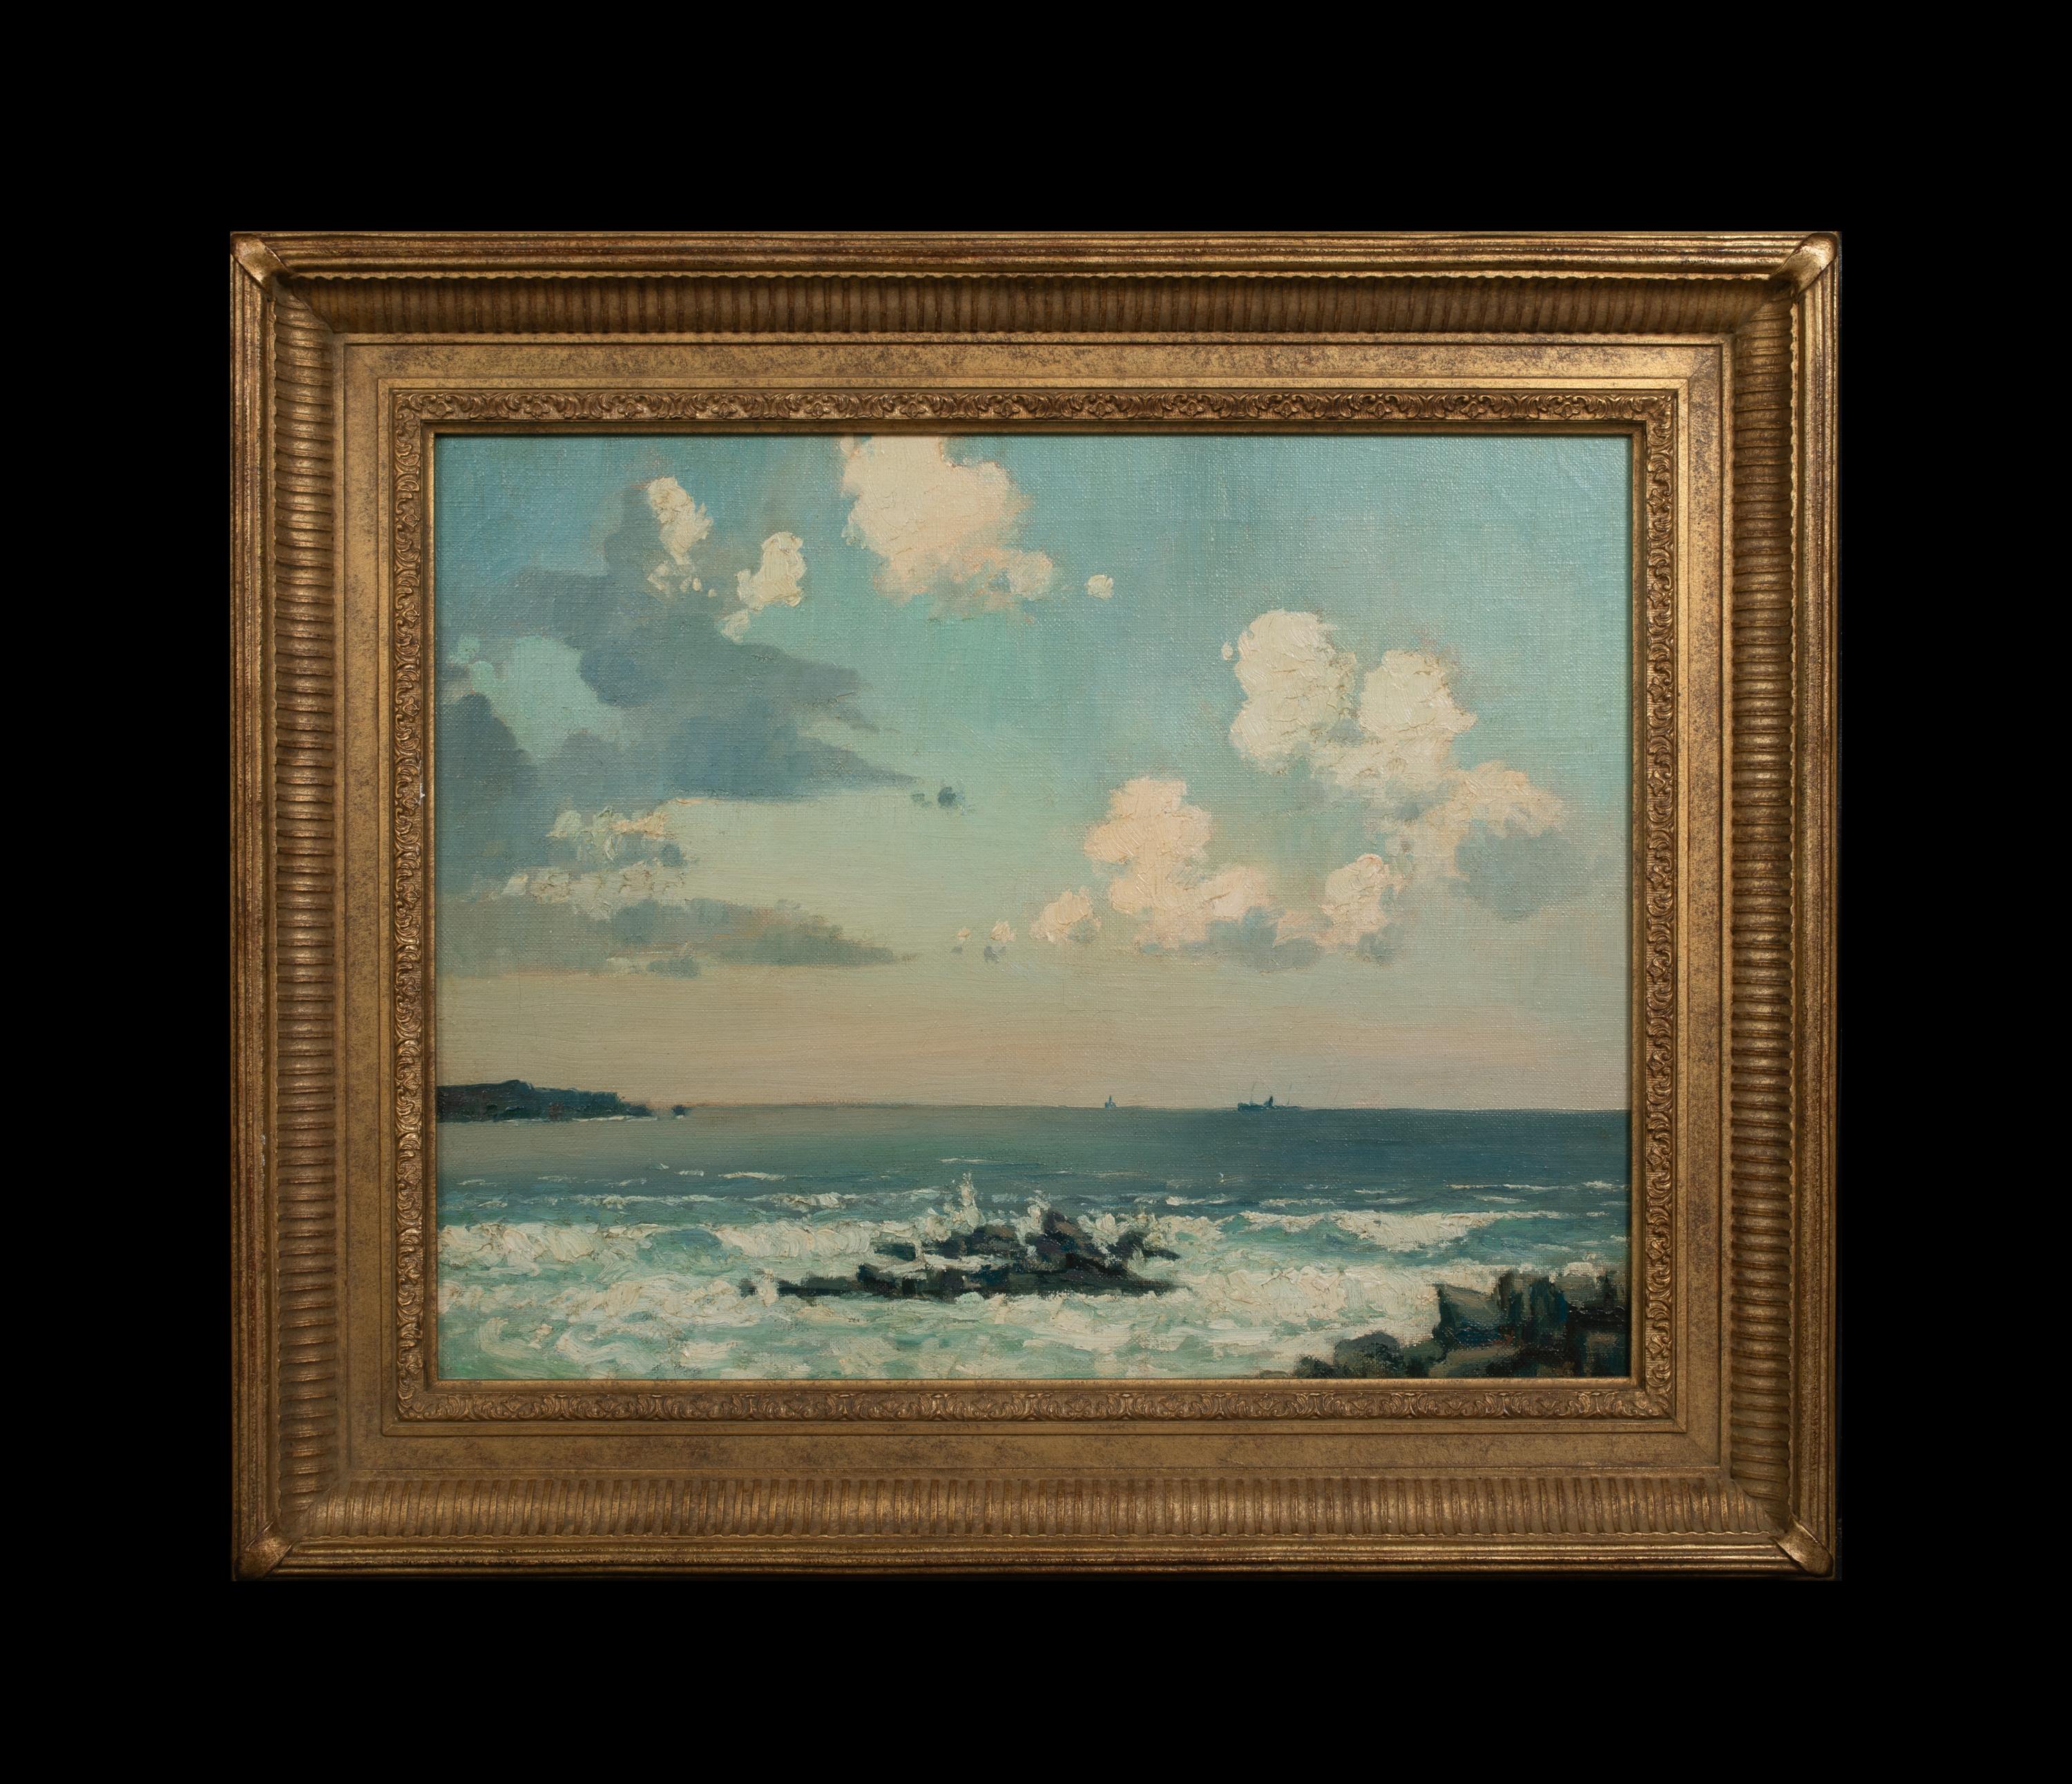 Seascape, 19th Century

attributed to William Page Atkinson WELLS (1872-1923)

19th century English Seascape, oil on canvas attributed to William Page Atkinson Wells, oil on canvas. Excellent quality and condition circa extensive view overlooking